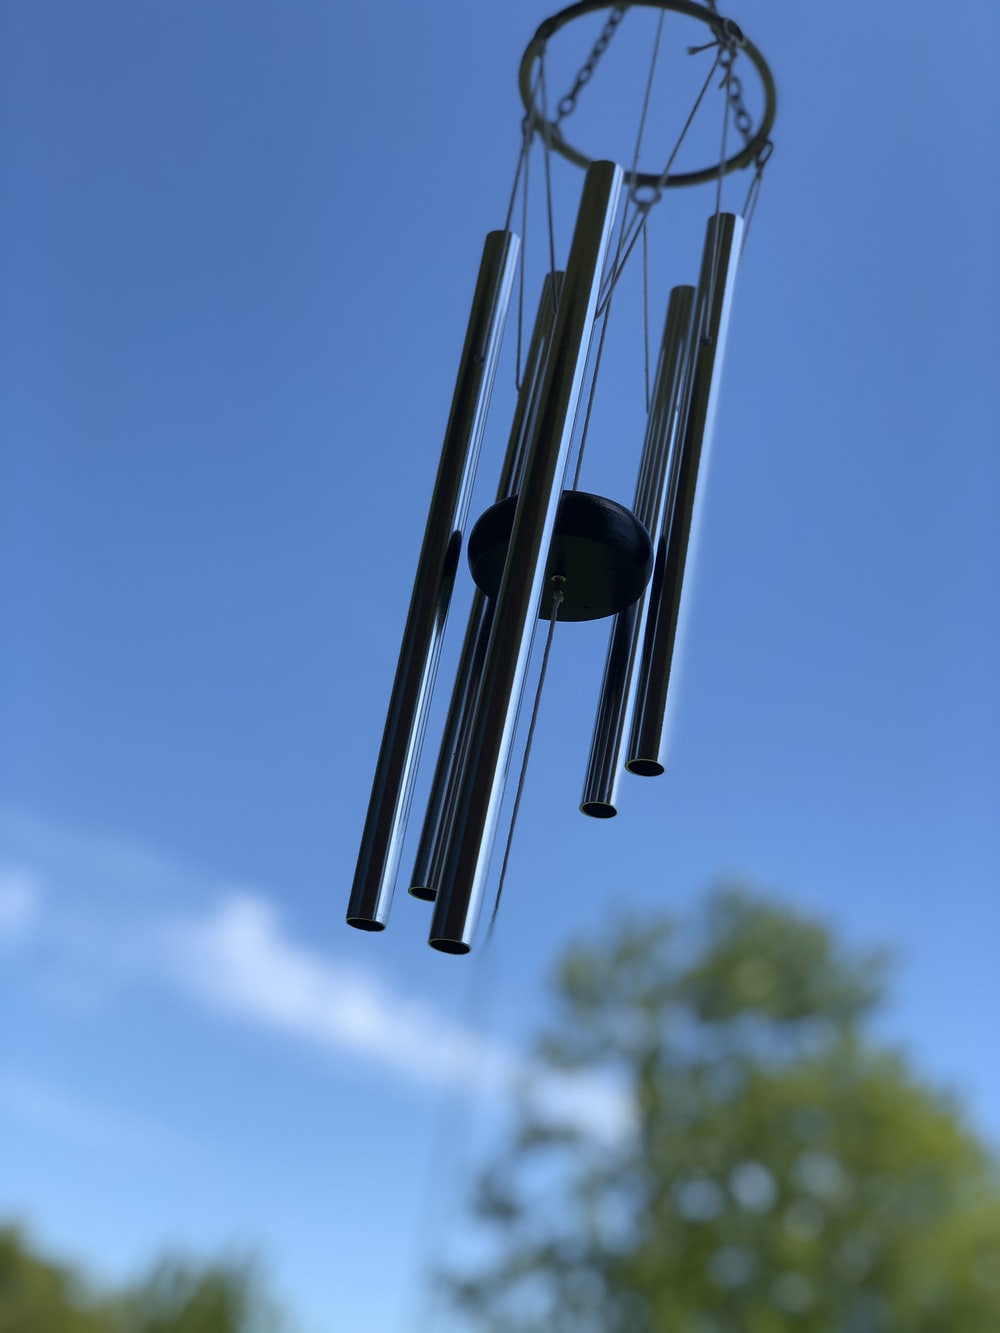 Windchime Picture. Download Free Image